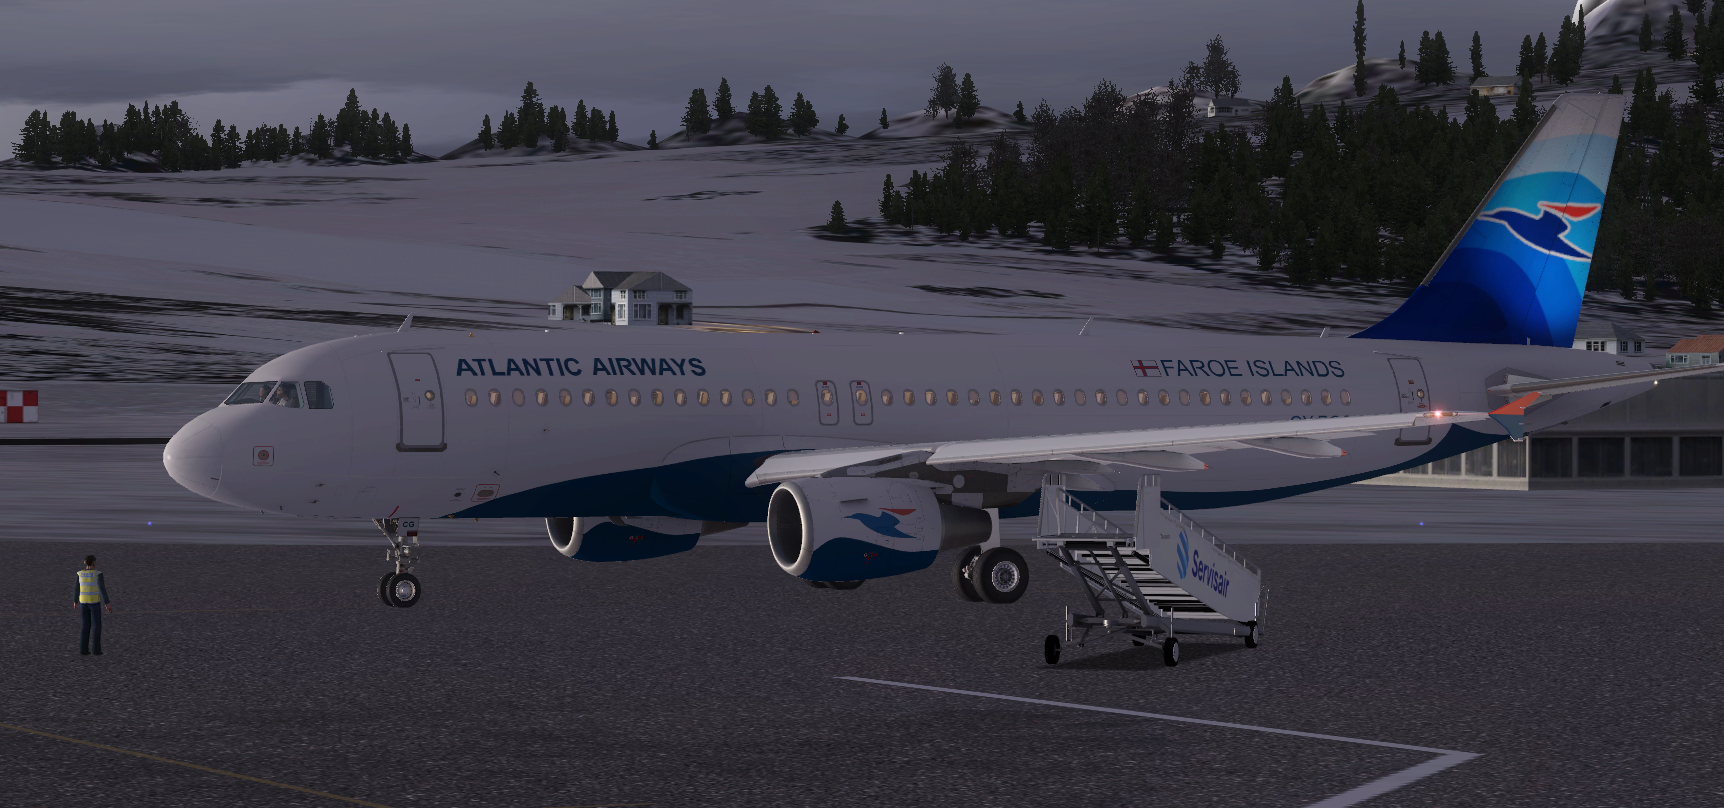 More information about "Airbus A320 CFM Atlantic Airways OY-RCG"